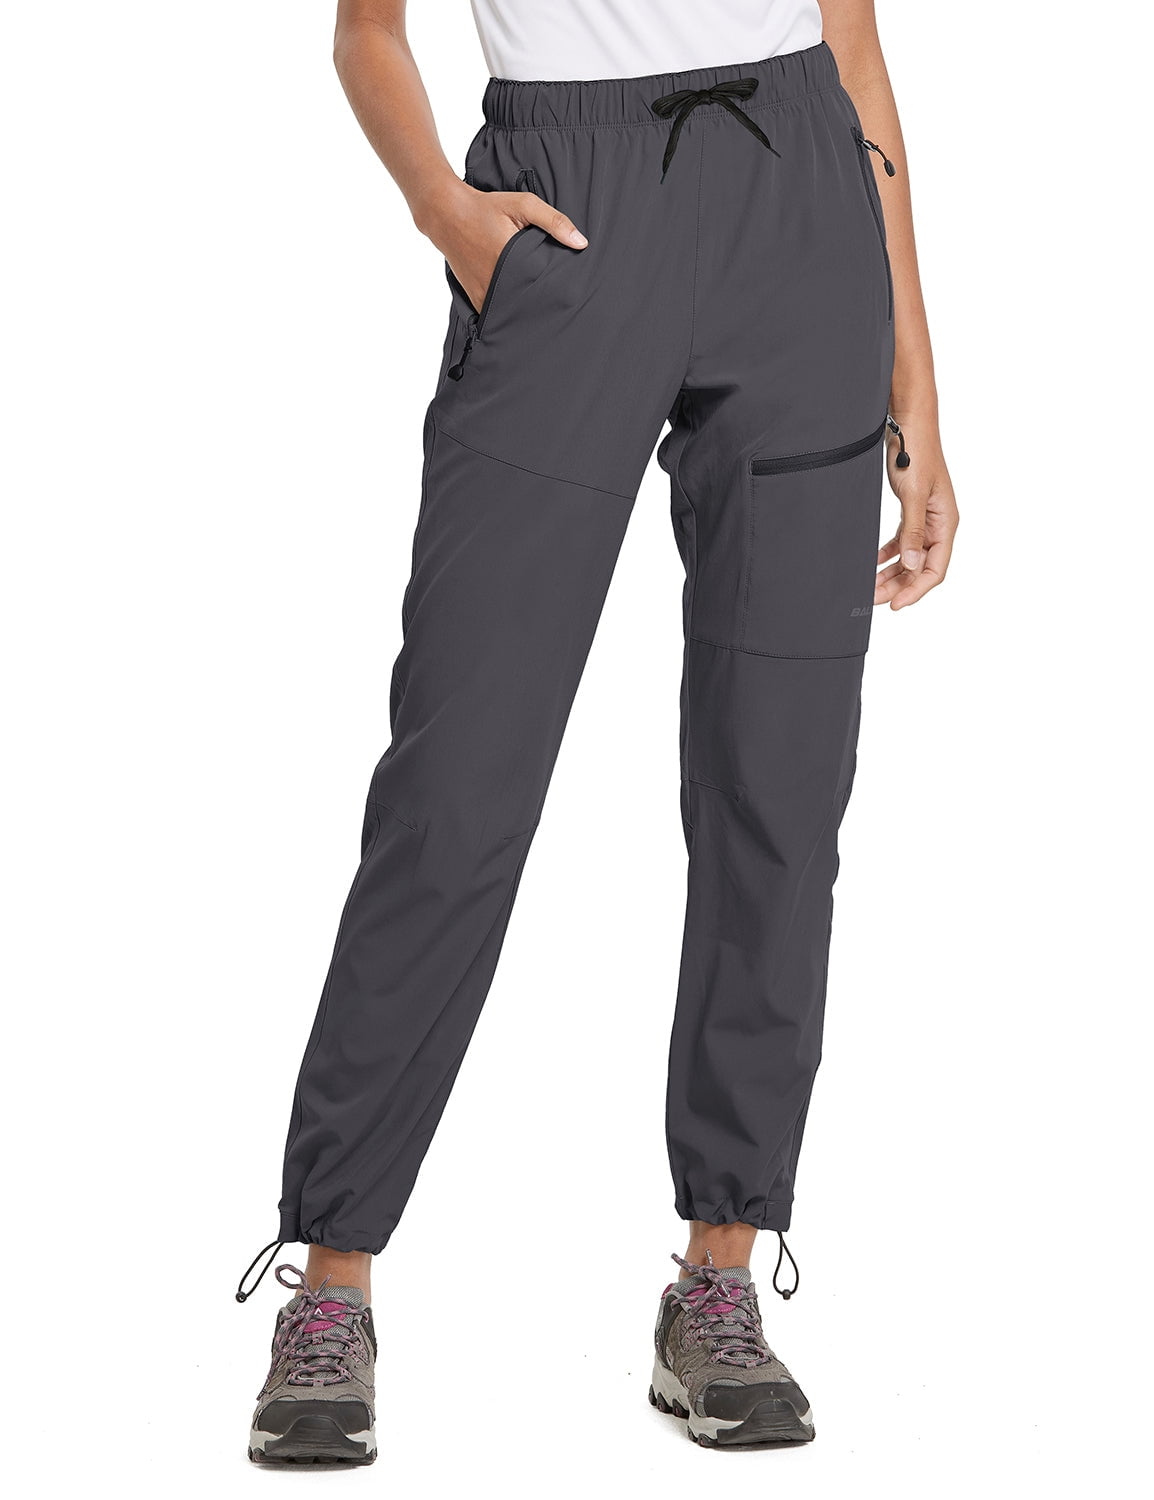 BALEAF Cargo Pants For Women Quick Dry Water Resistant With 4 Zip-Closure  Pockets Elastic Waist Deep Gray Size XS